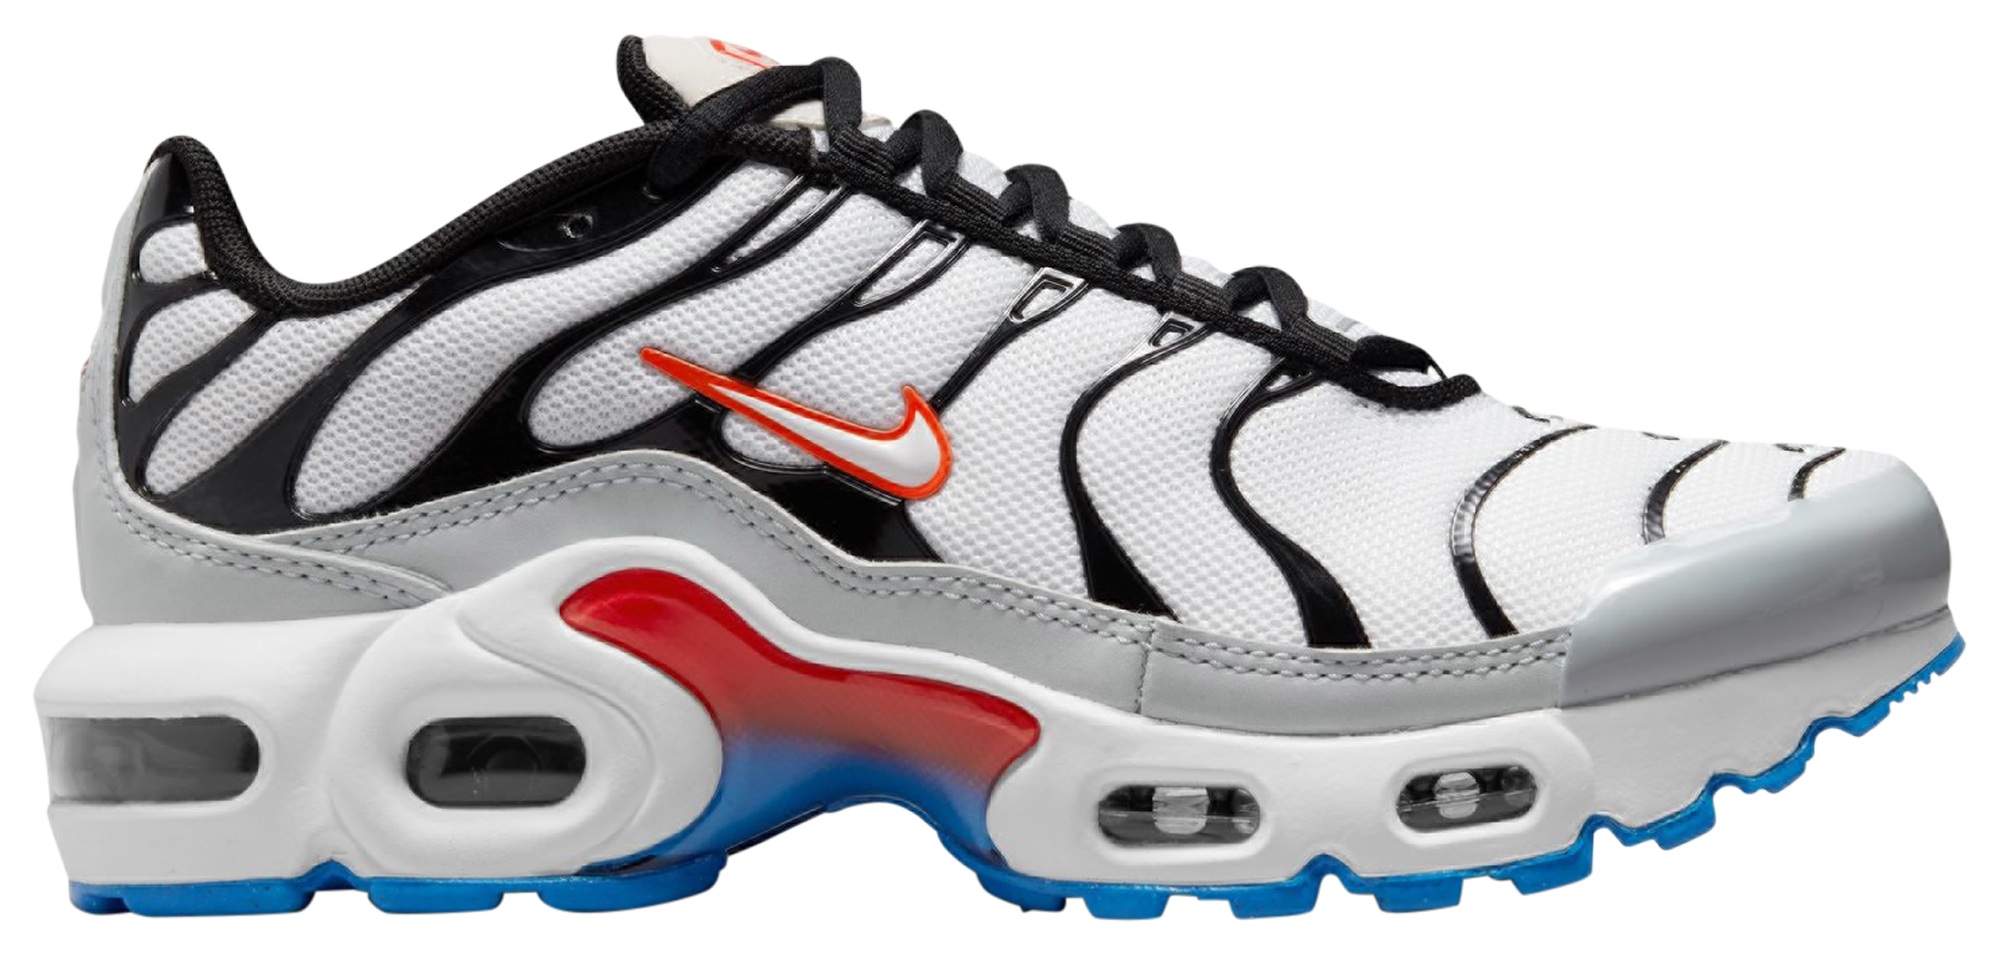 Divertidísimo vertical Oeste Nike Air Max Plus Remaster | Champs Sports